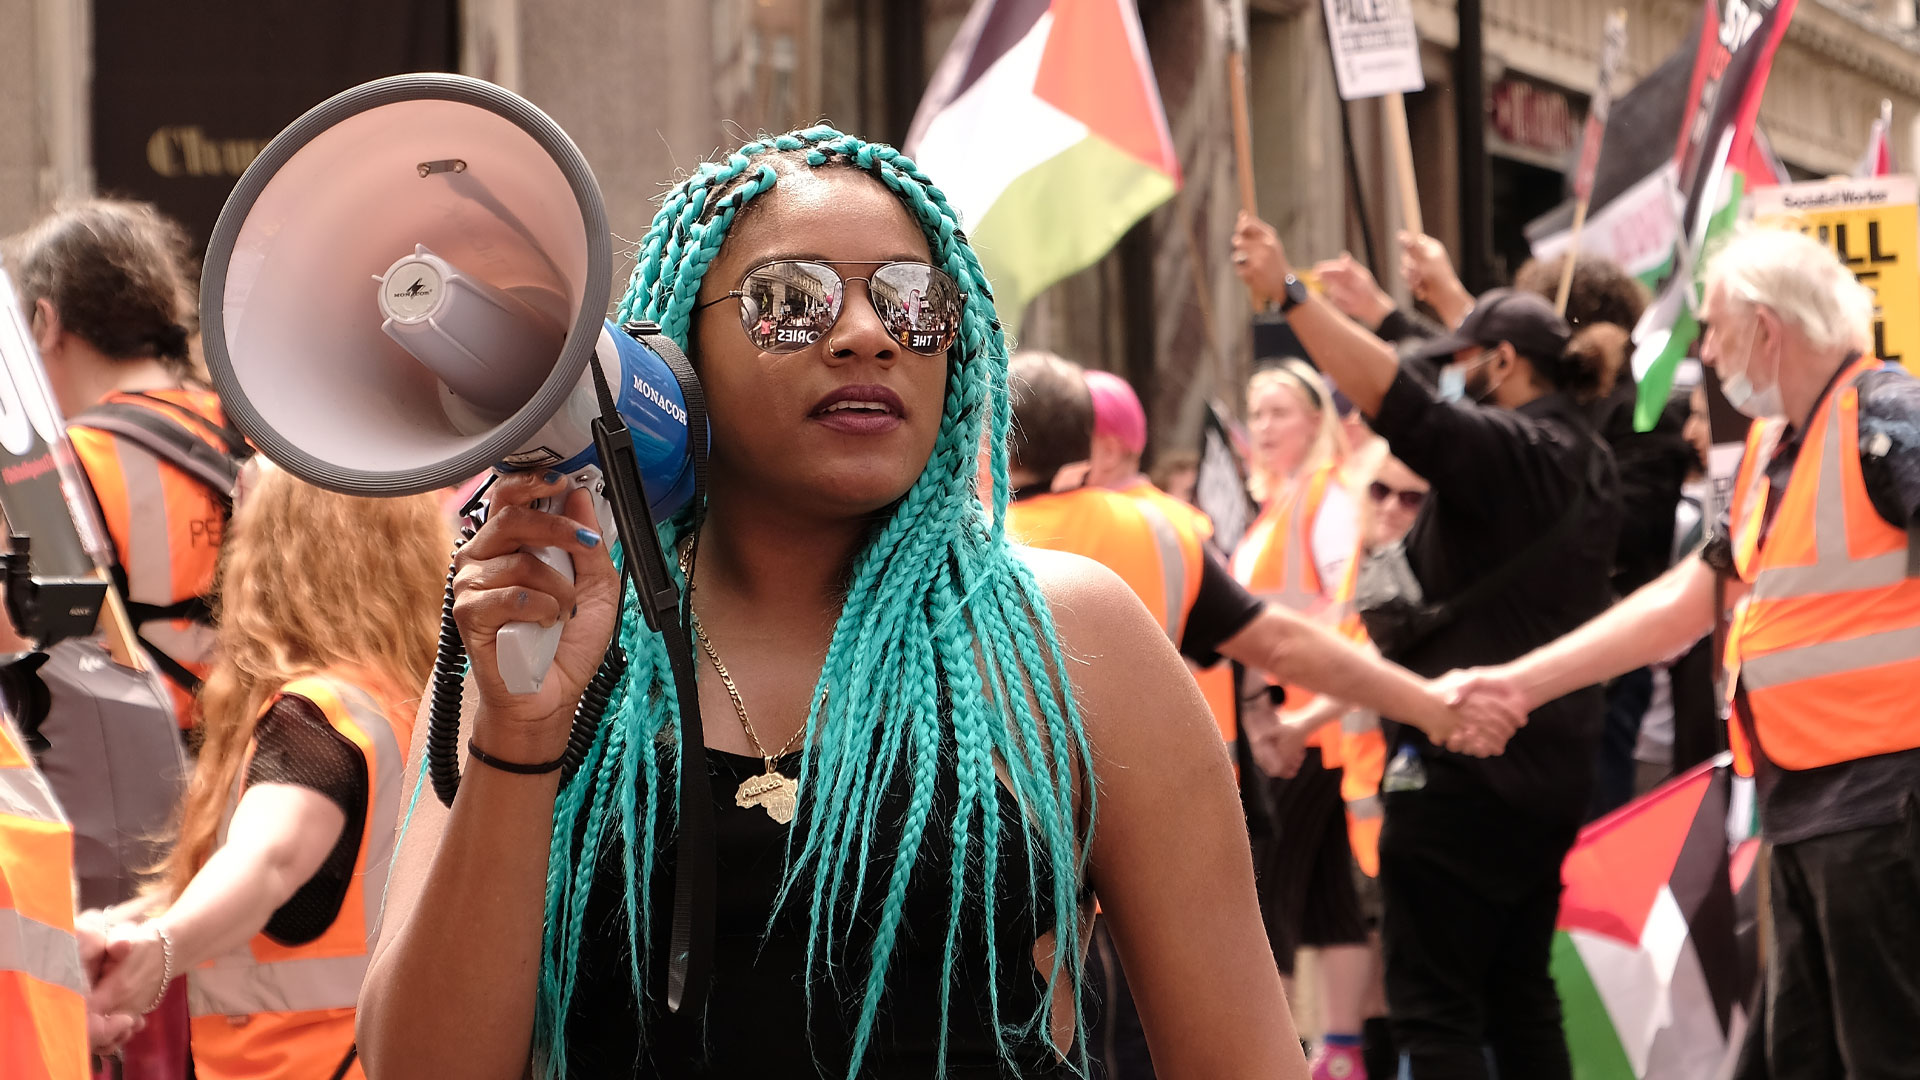 Chantelle Lunt holding a megaphone at a protest